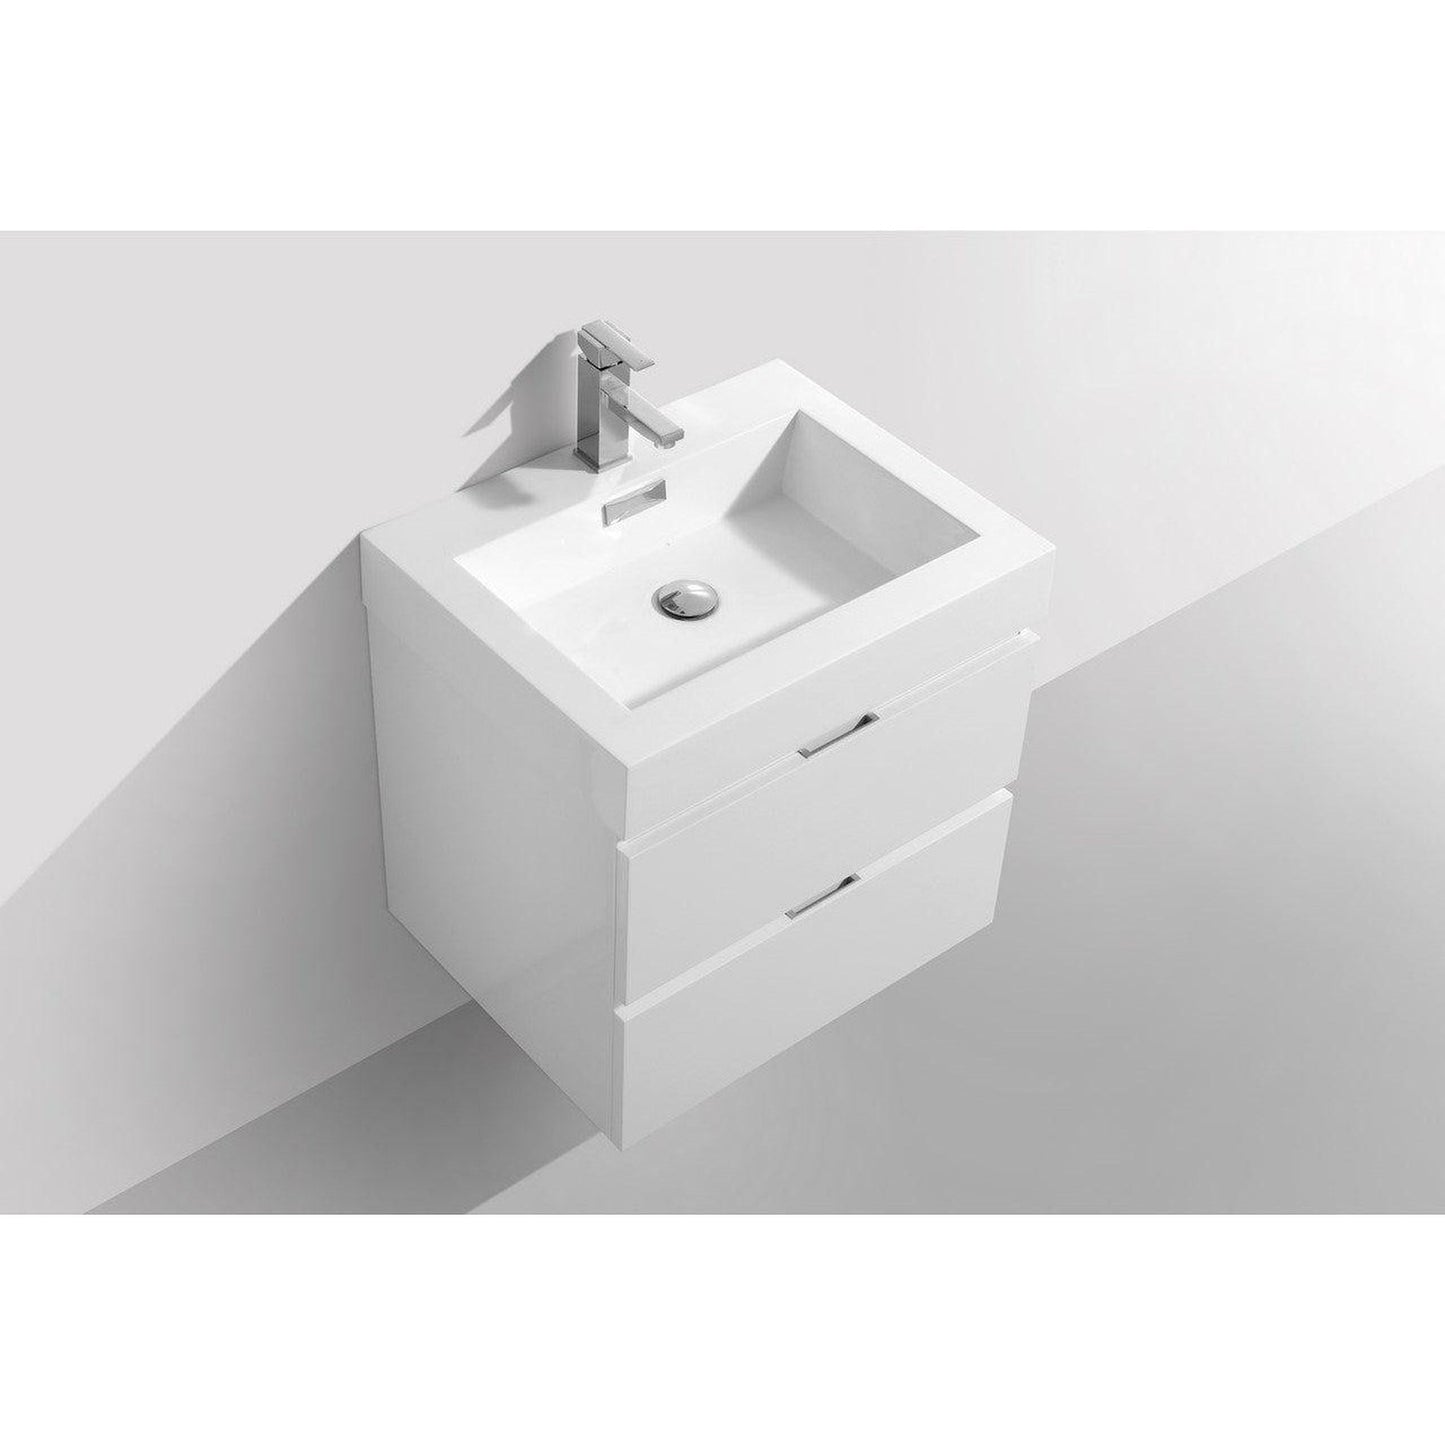 KubeBath Bliss 24" High Gloss White Wall-Mounted Modern Bathroom Vanity With Single Integrated Acrylic Sink With Overflow and 24" White Framed Mirror With Shelf